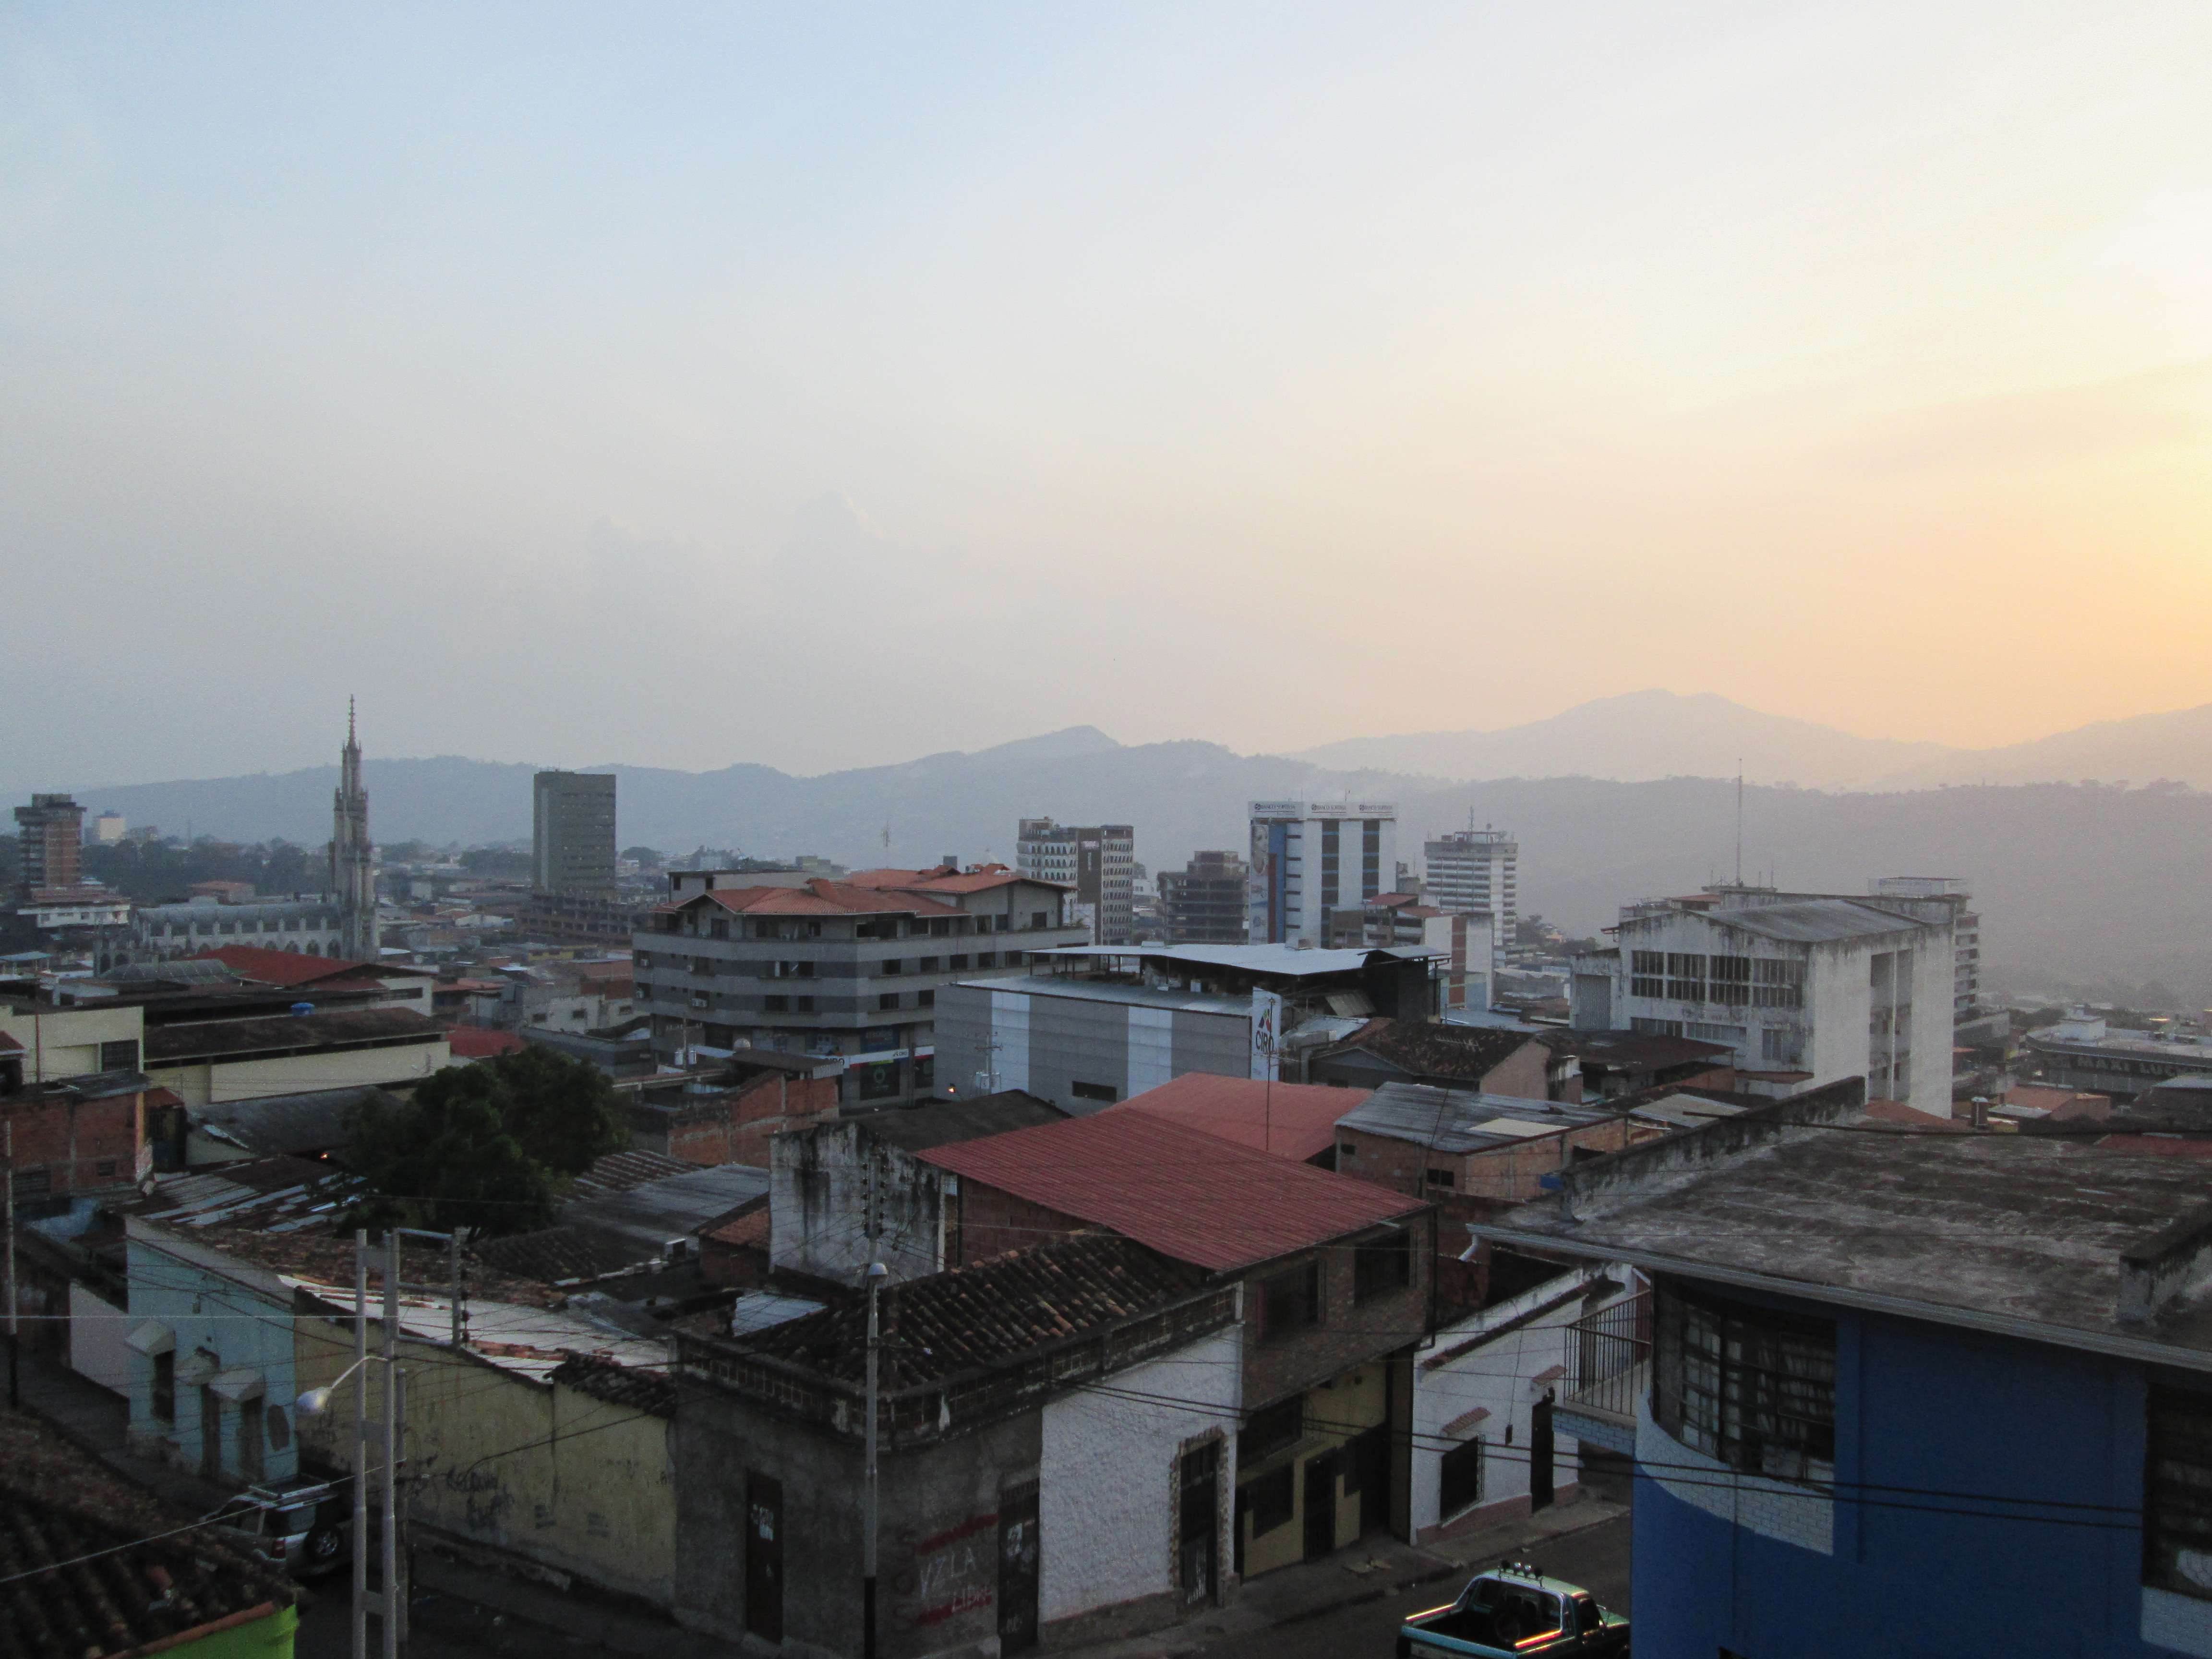 A view of San Cristóbal from my host's roof